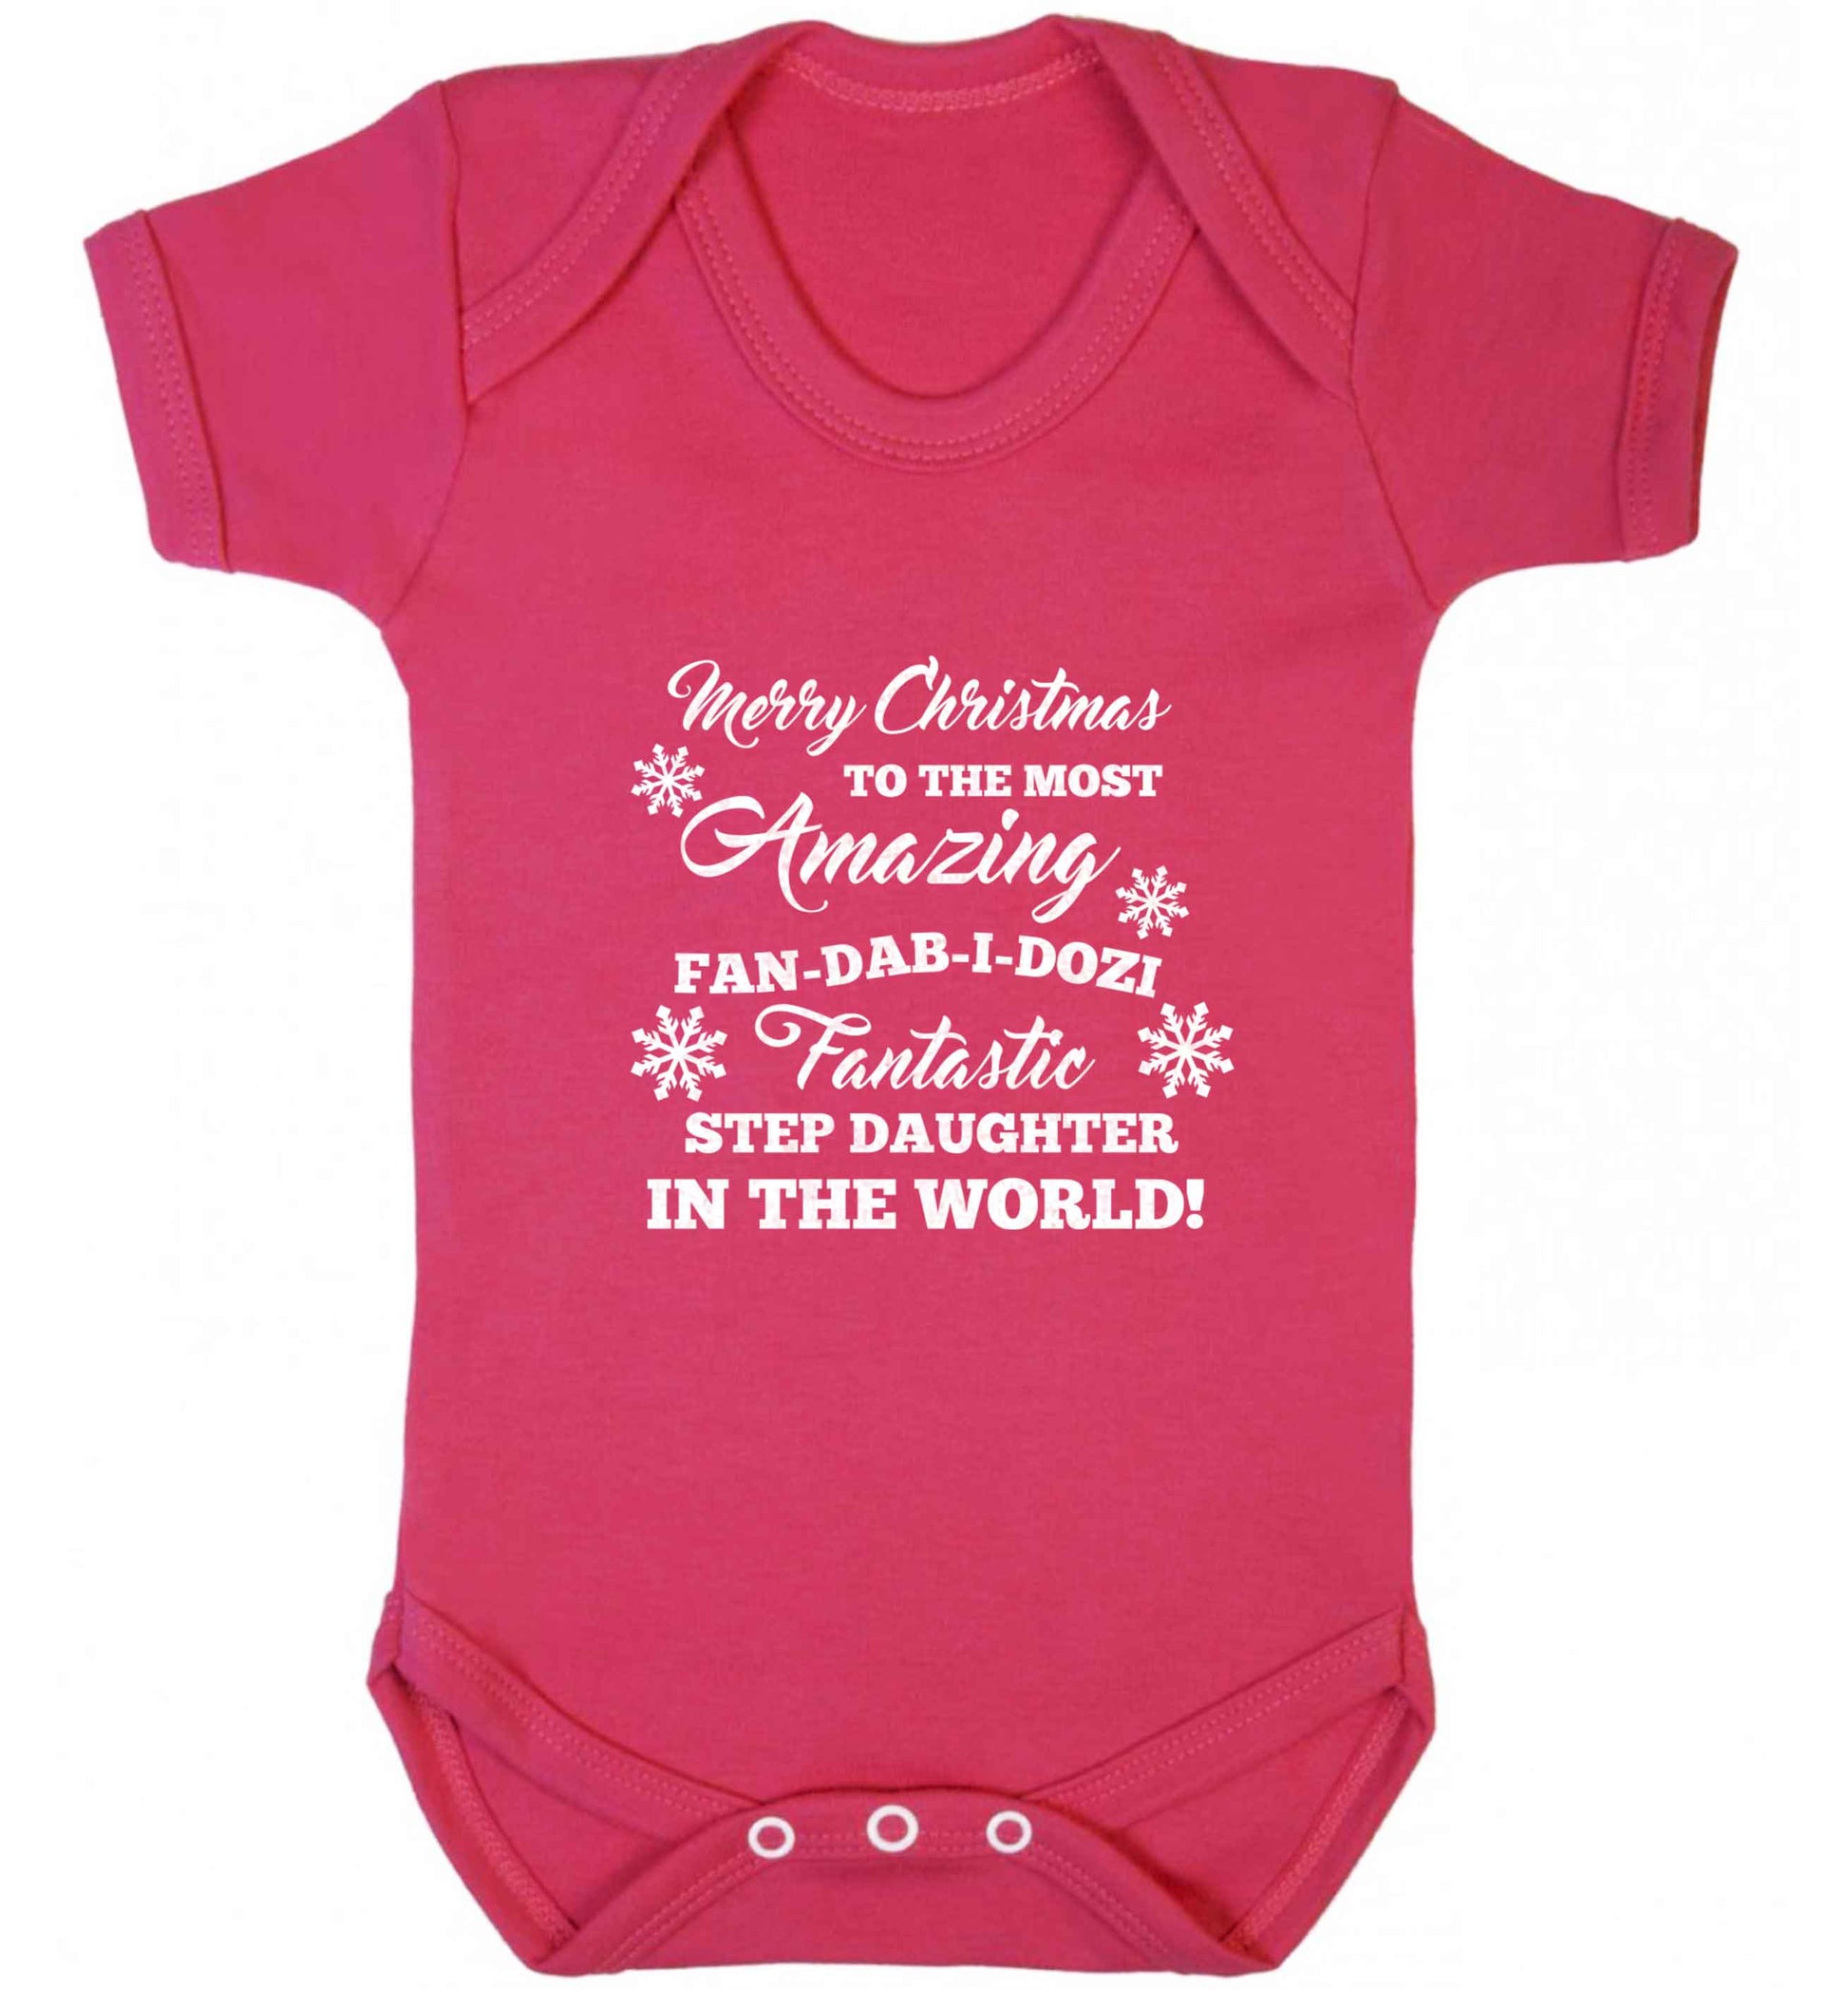 Merry Christmas to the most amazing fan-dab-i-dozi fantasic Step Daughter in the world baby vest dark pink 18-24 months